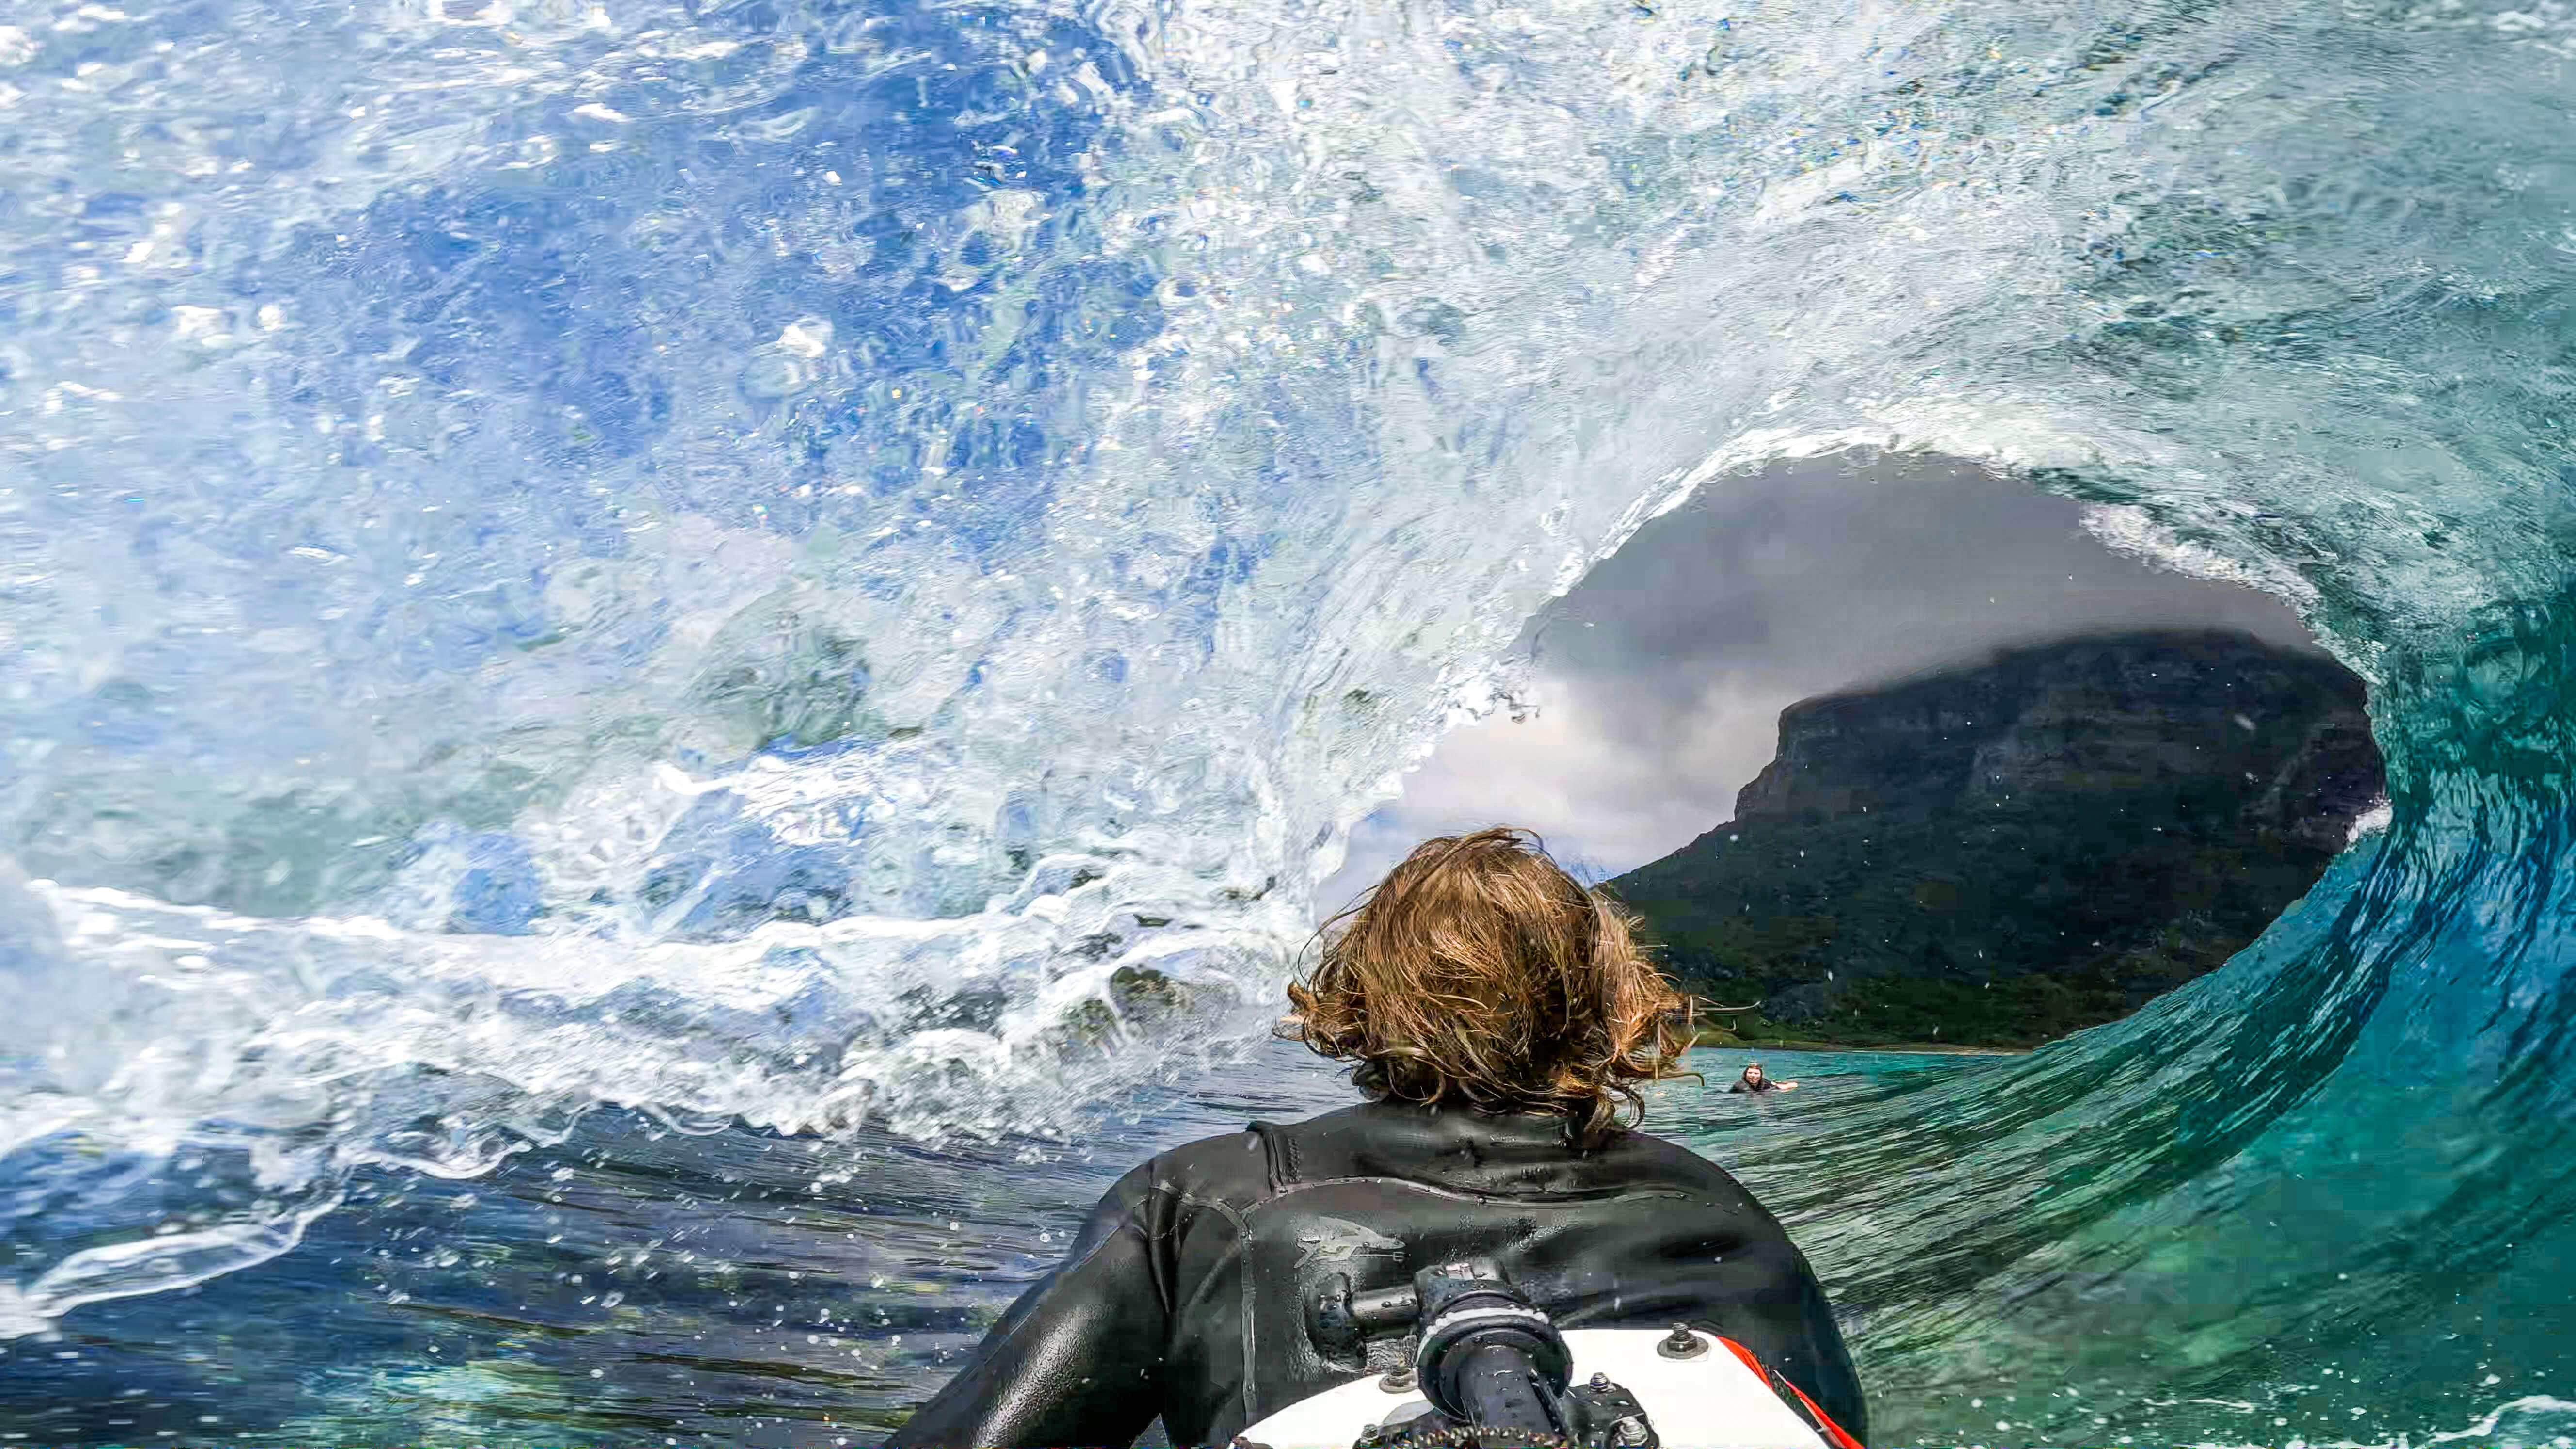 Surfer travelling through wave